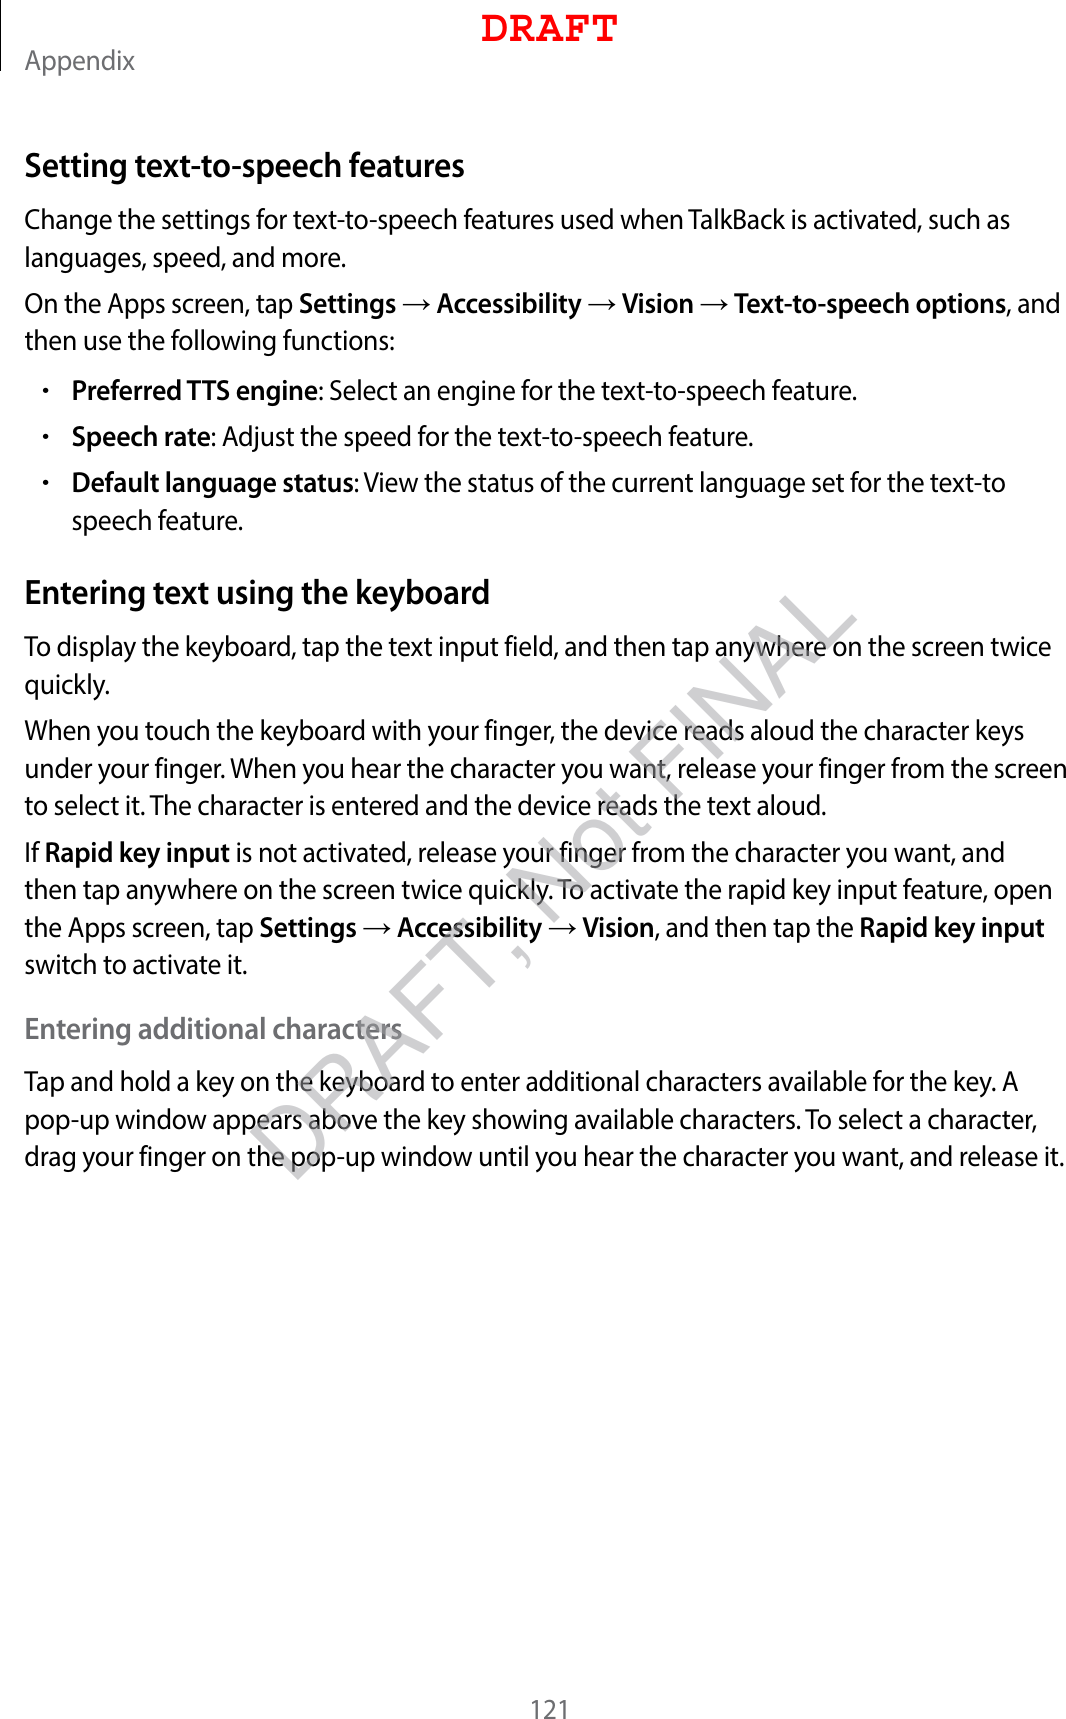 Appendix121Setting text-to-speech featuresChange the settings for text-to-speech features used when TalkBack is activated, such as languages, speed, and more.On the Apps screen, tap Settings  Accessibility  Vision  Text-to-speech options, and then use the following functions:•Preferred TTS engine: Select an engine for the text-to-speech feature.•Speech rate: Adjust the speed for the text-to-speech feature.•Default language status: View the status of the current language set for the text-to speech feature.Entering text using the keyboardTo display the keyboard, tap the text input field, and then tap anywhere on the screen twice quickly.When you touch the keyboard with your finger, the device reads aloud the character keys under your finger. When you hear the character you want, release your finger from the screen to select it. The character is entered and the device reads the text aloud.If Rapid key input is not activated, release your finger from the character you want, and then tap anywhere on the screen twice quickly. To activate the rapid key input feature, open the Apps screen, tap Settings  Accessibility  Vision, and then tap the Rapid key input switch to activate it.Entering additional charactersTap and hold a key on the keyboard to enter additional characters available for the key. A pop-up window appears above the key showing available characters. To select a character, drag your finger on the pop-up window until you hear the character you want, and release it.DRAFTDRAFT, Not FINAL